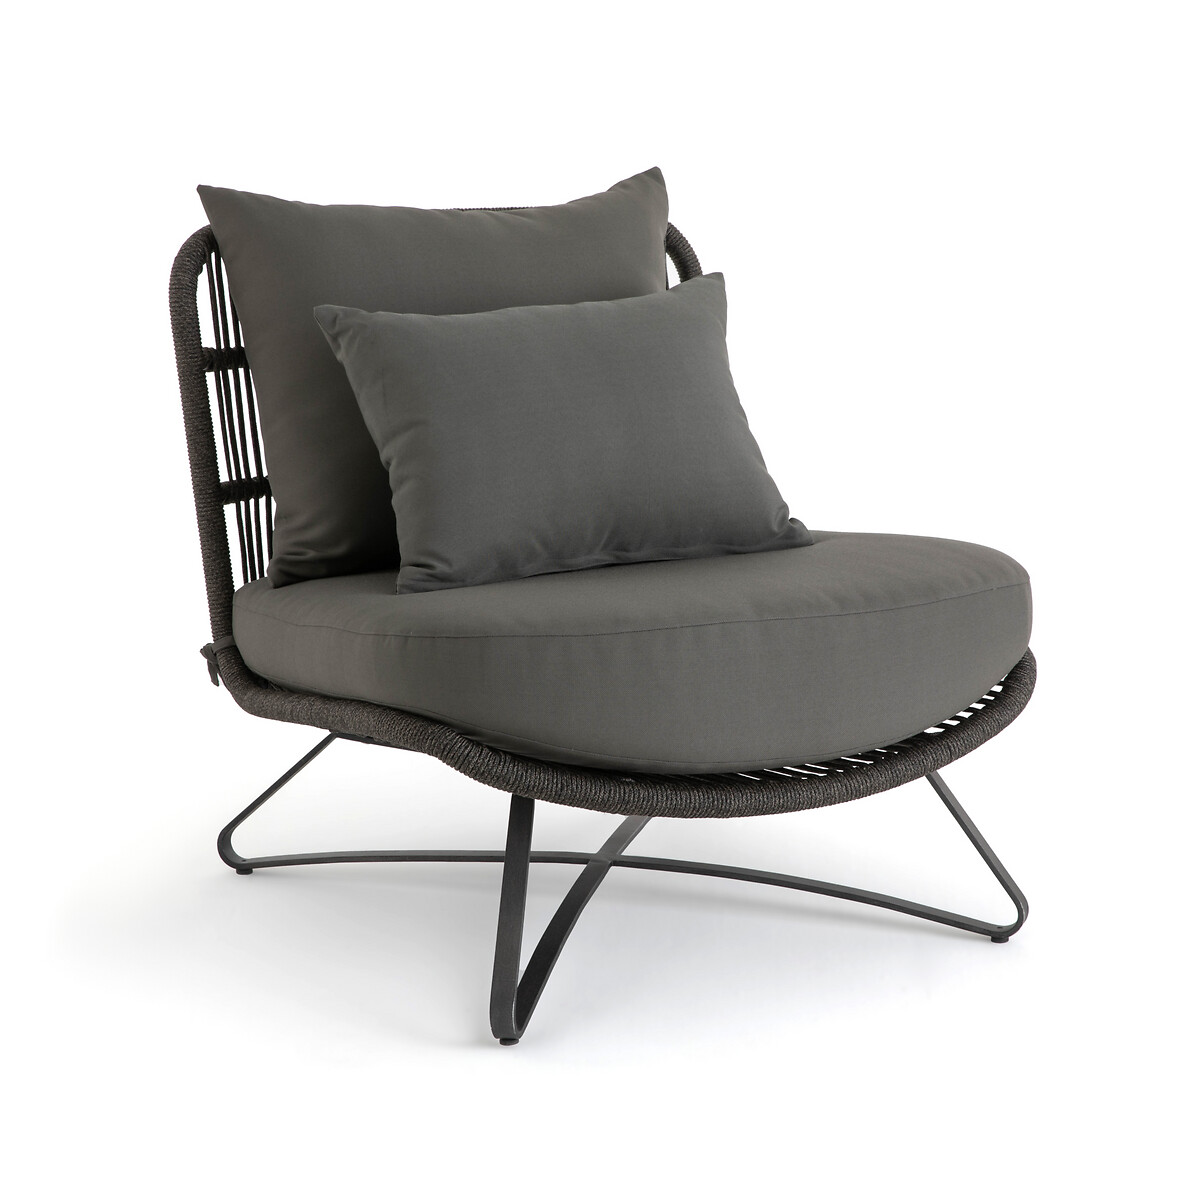 Fauteuil lounge outdoor Helma